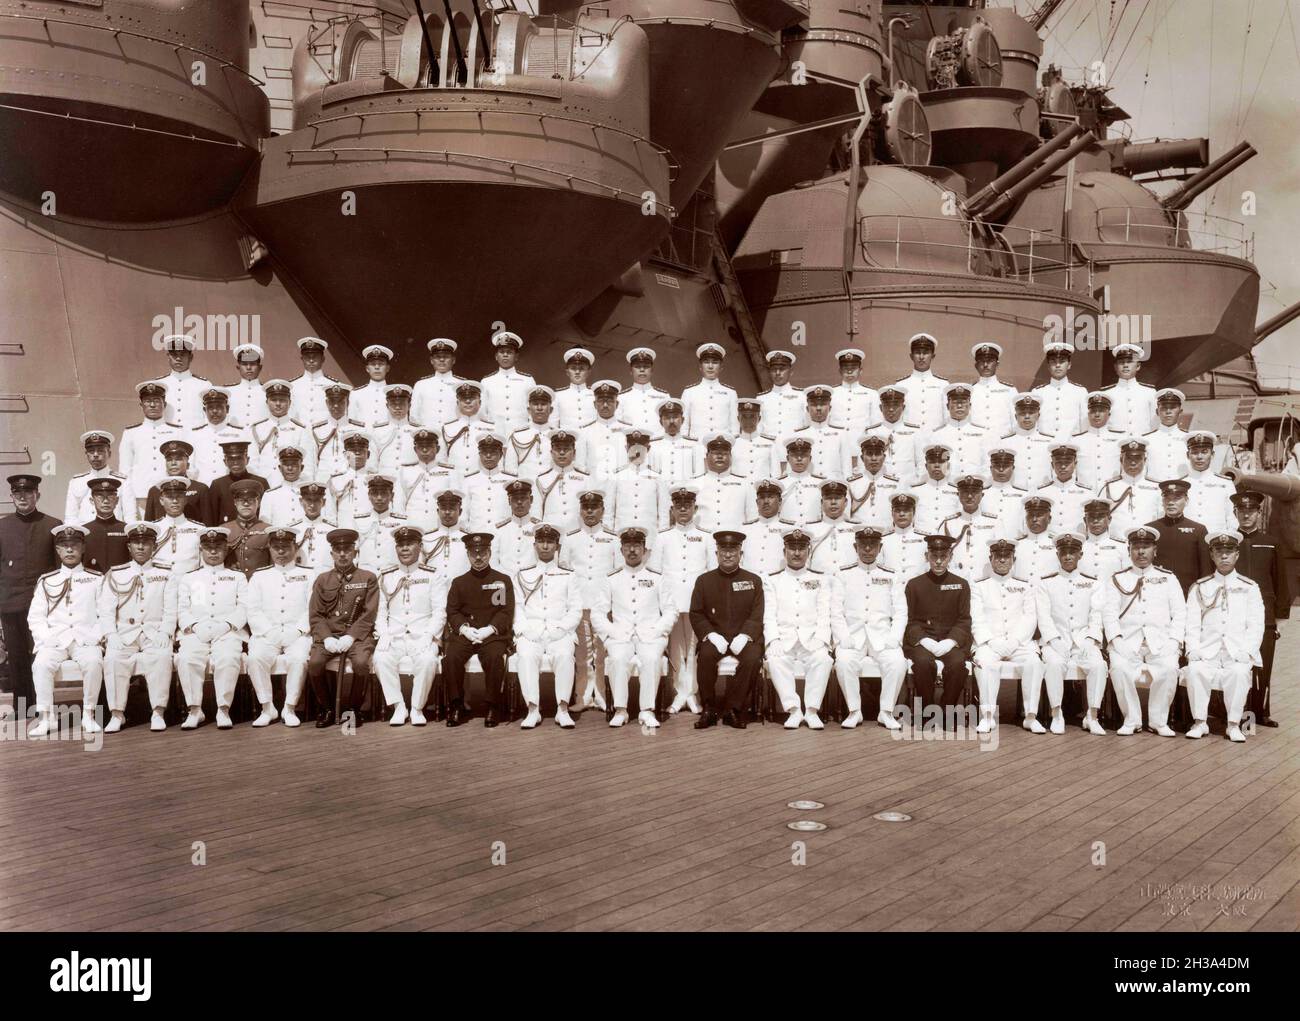 Emperor Hirohito of Japan (front row, center), with officers of the Imperial Japanese Navy, on board the Japanese battleship Musashi off Yokosuka Naval Base, 24 June 1943. Admiral Osami Nagano is sixth from left in the front row. Stock Photo